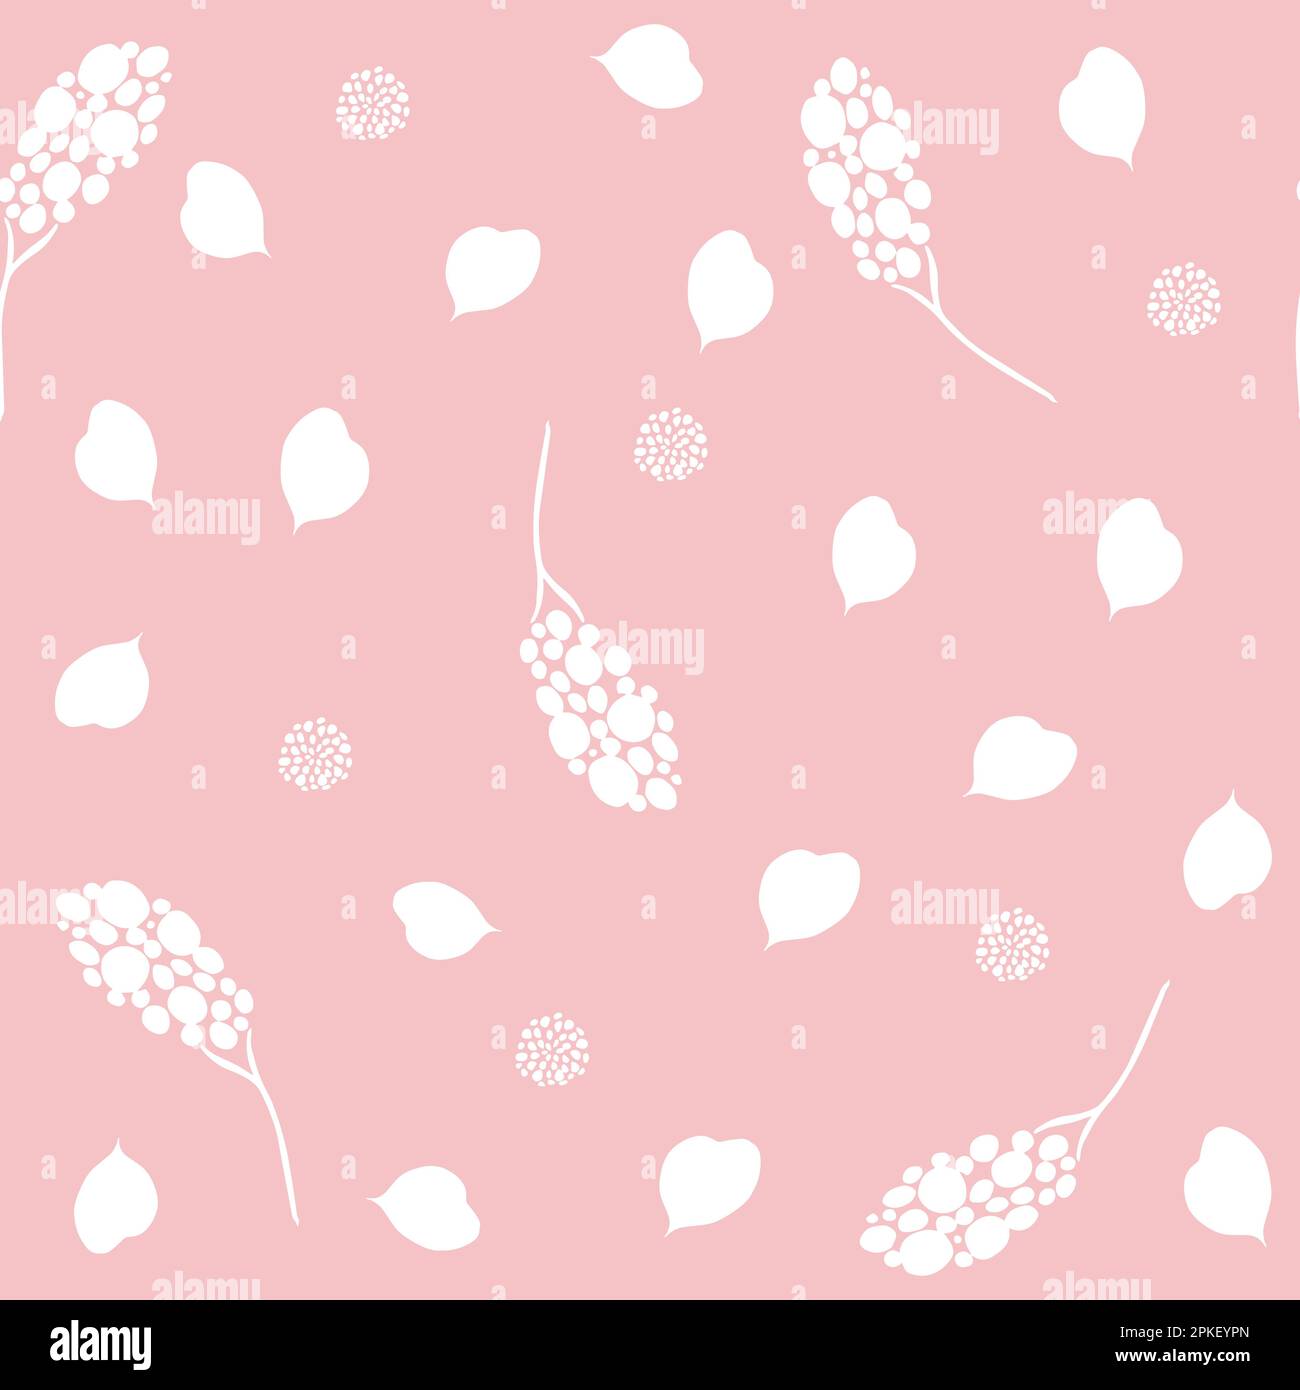 Pale pink seamless pattern of hand drawn flowers and petals Stock Vector